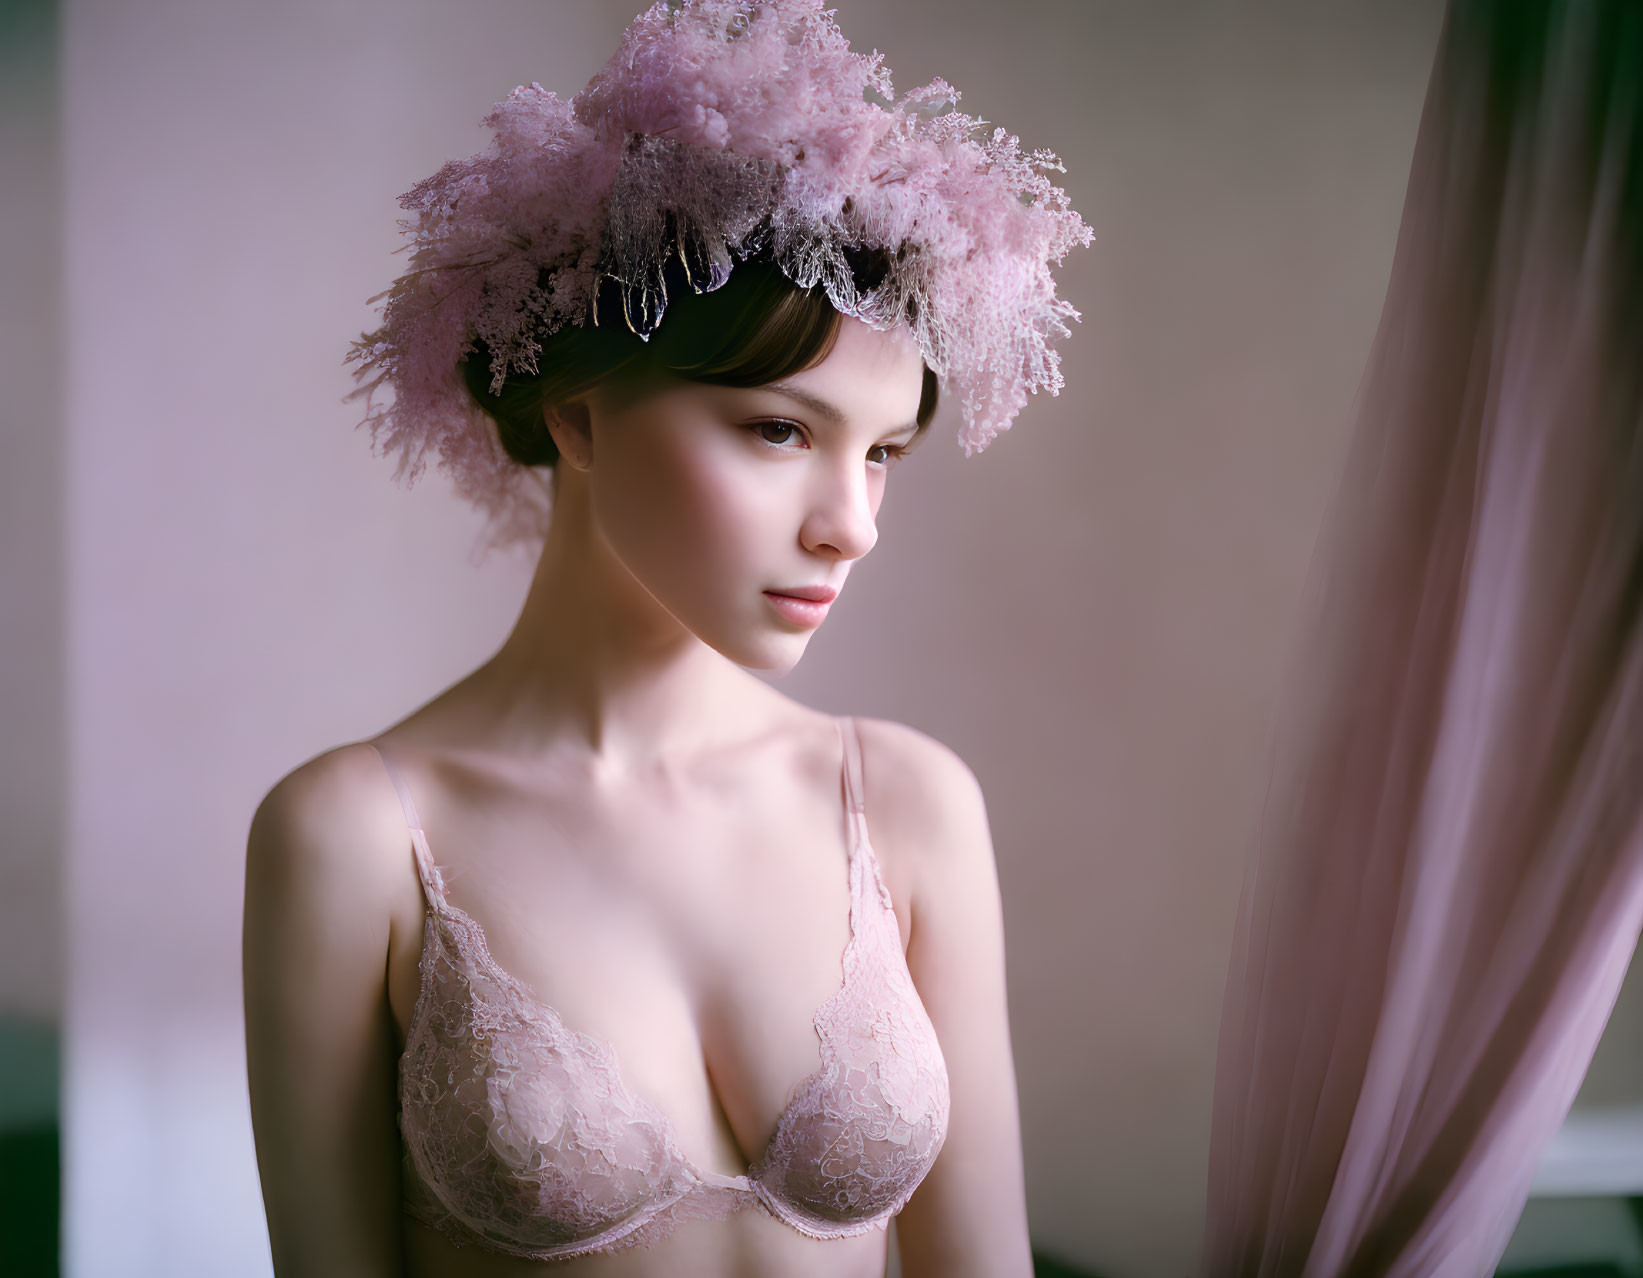 Woman wearing delicate flower crown in soft pink lace-trimmed garment